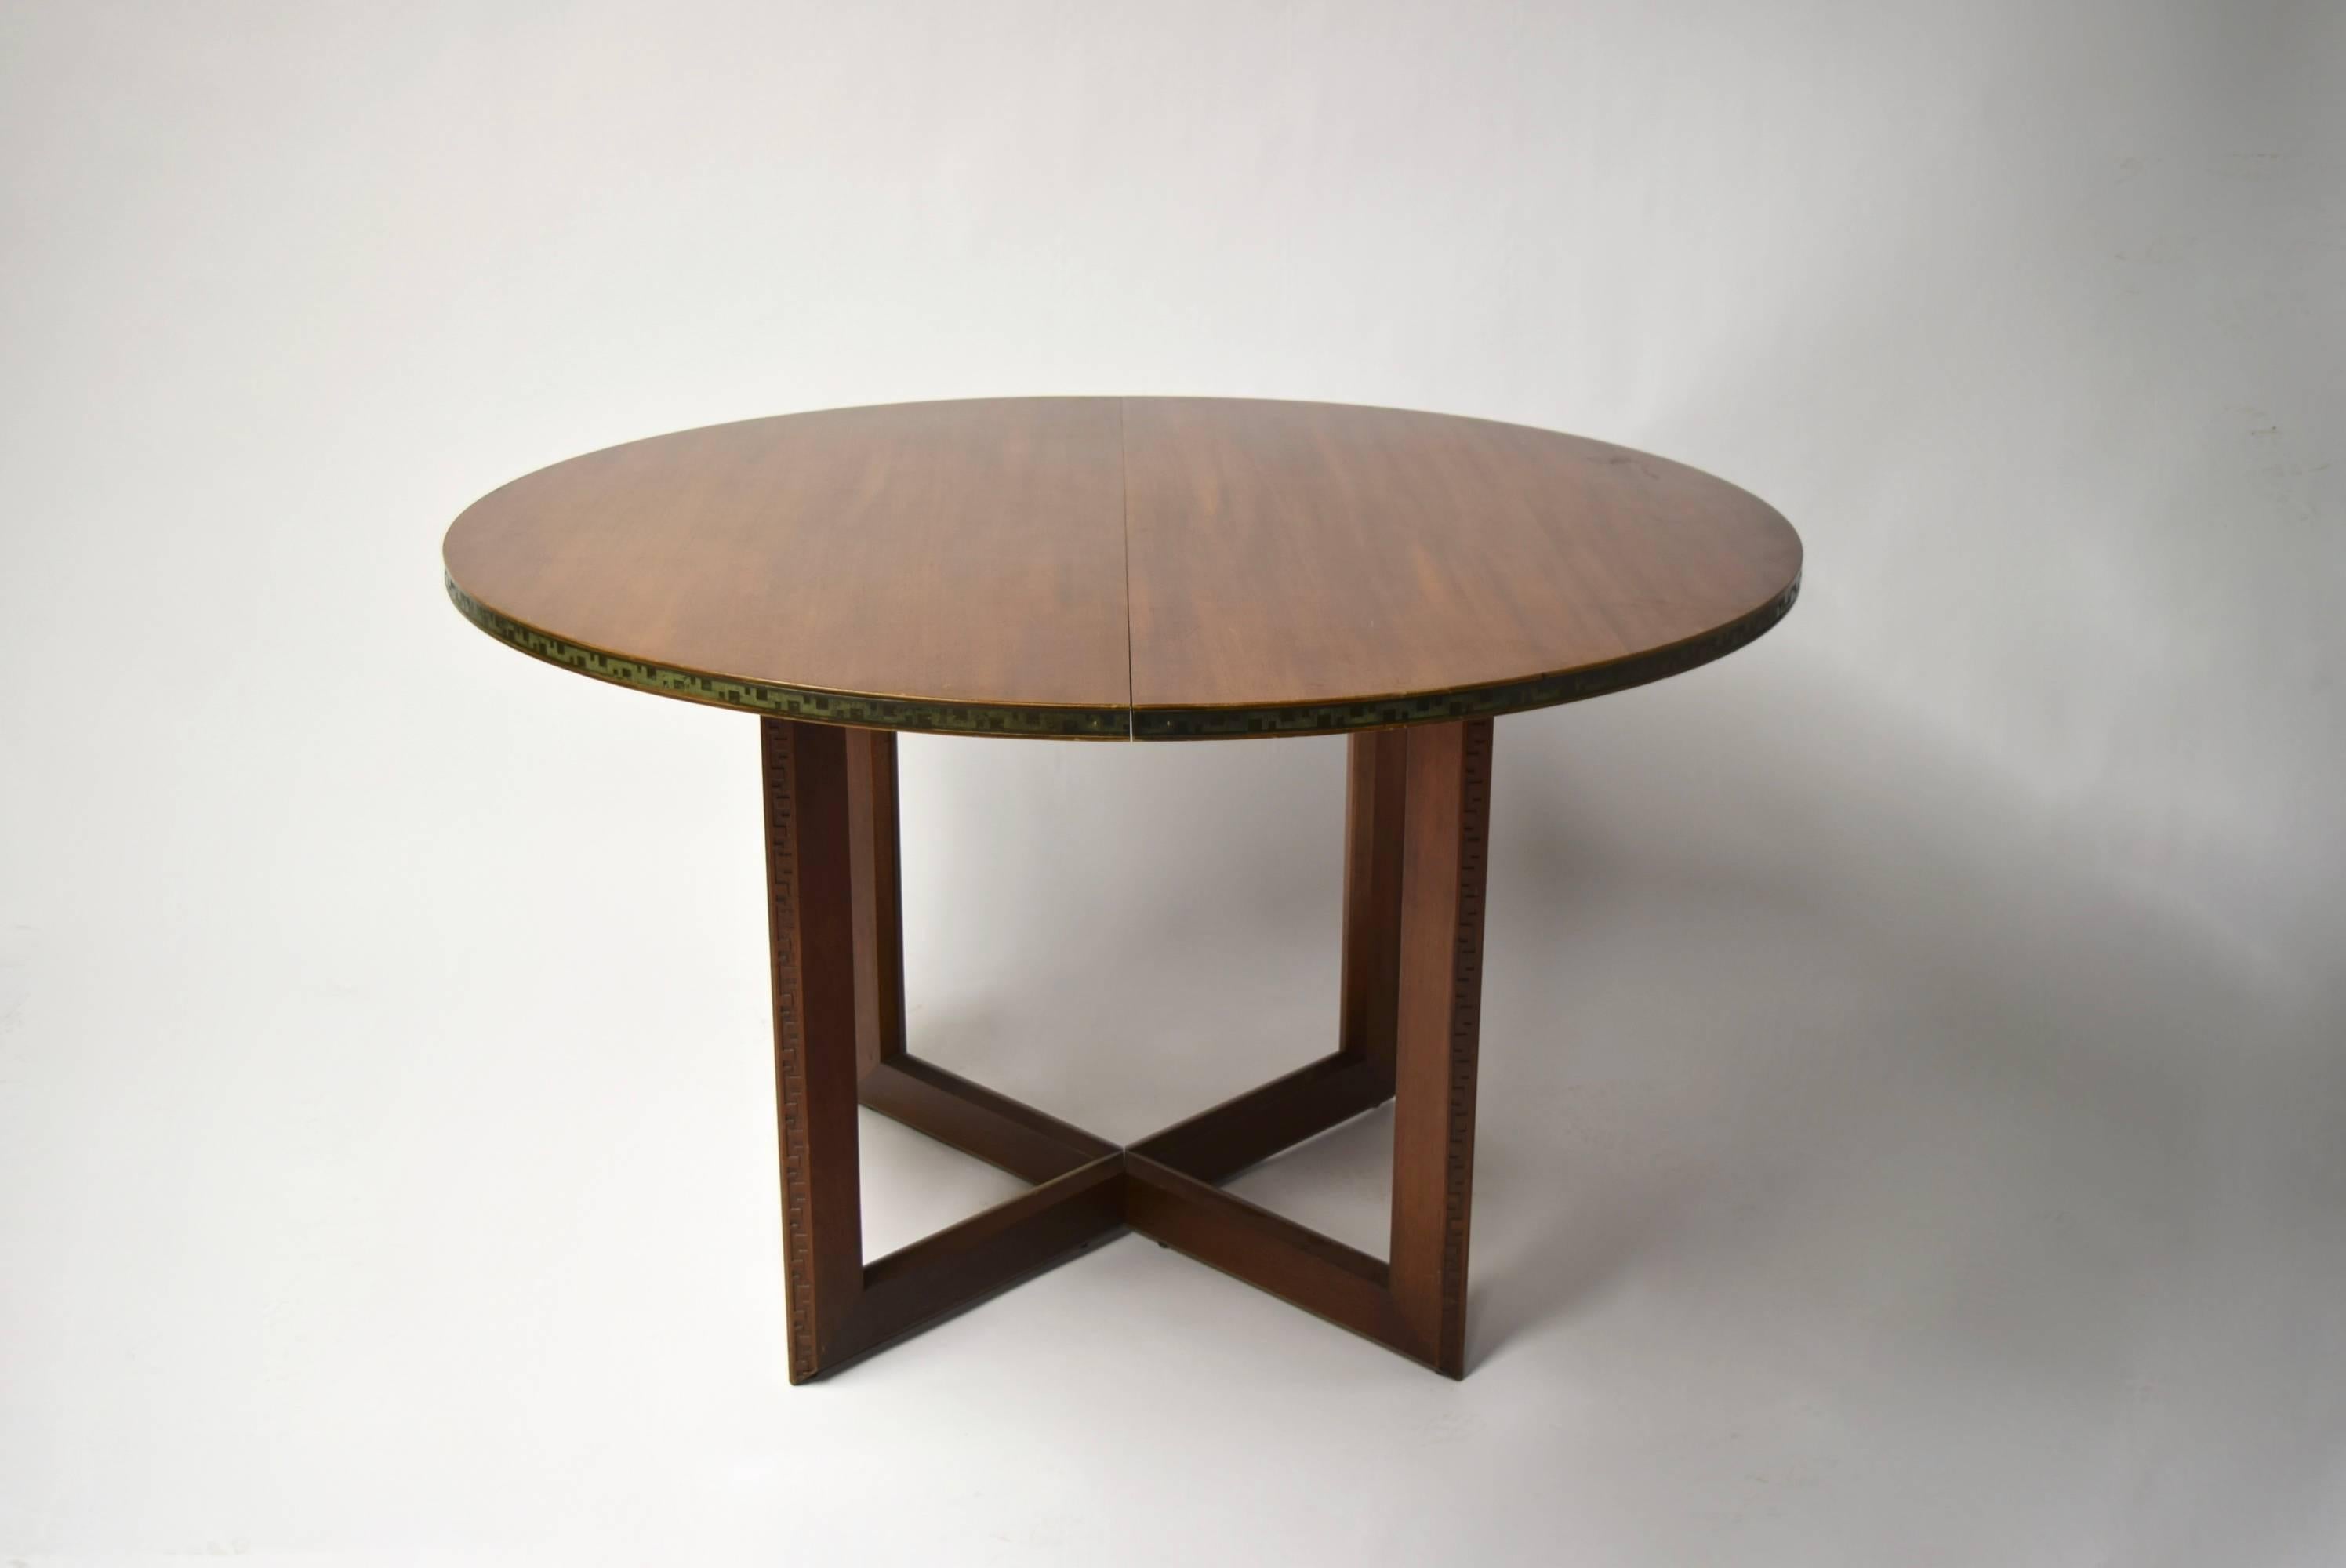 Round Taliesin mahogany dining table with an embossed copper banding, original patina preserved, along the top's border and the Taliesin design engraving along the edge of each leg. The table expands to an oval and each 16